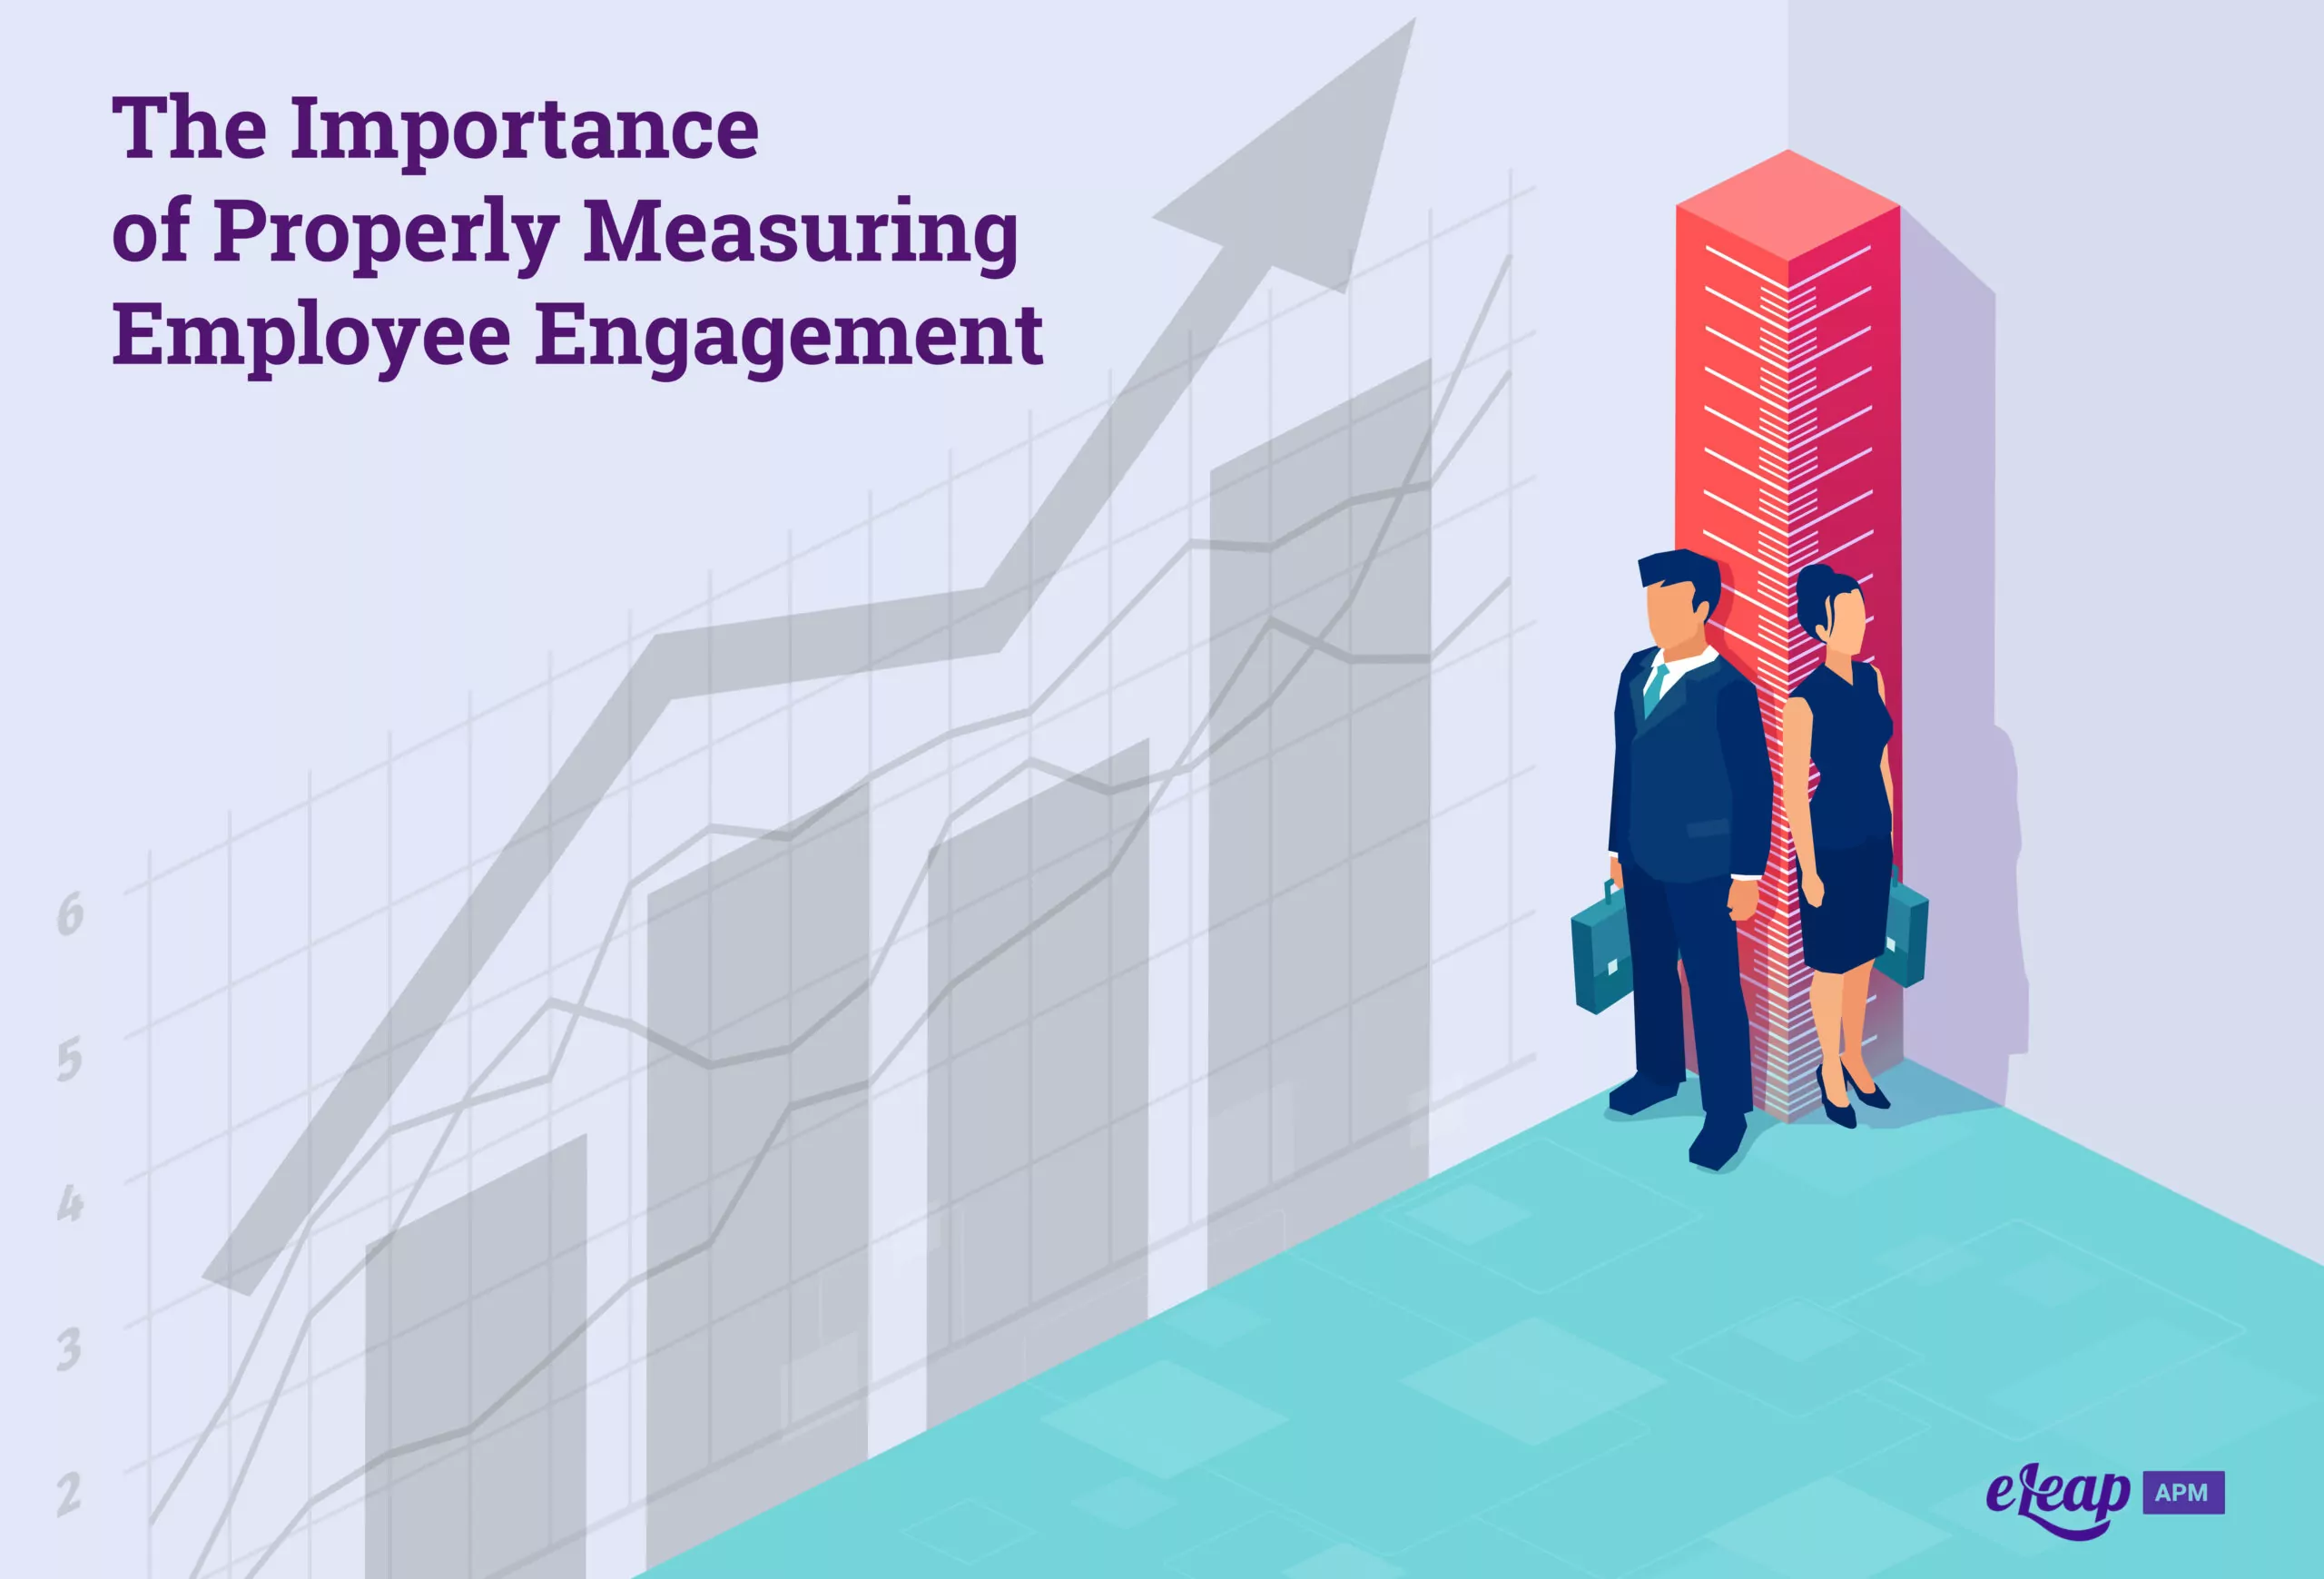 The Importance of Properly Measuring Employee Engagement